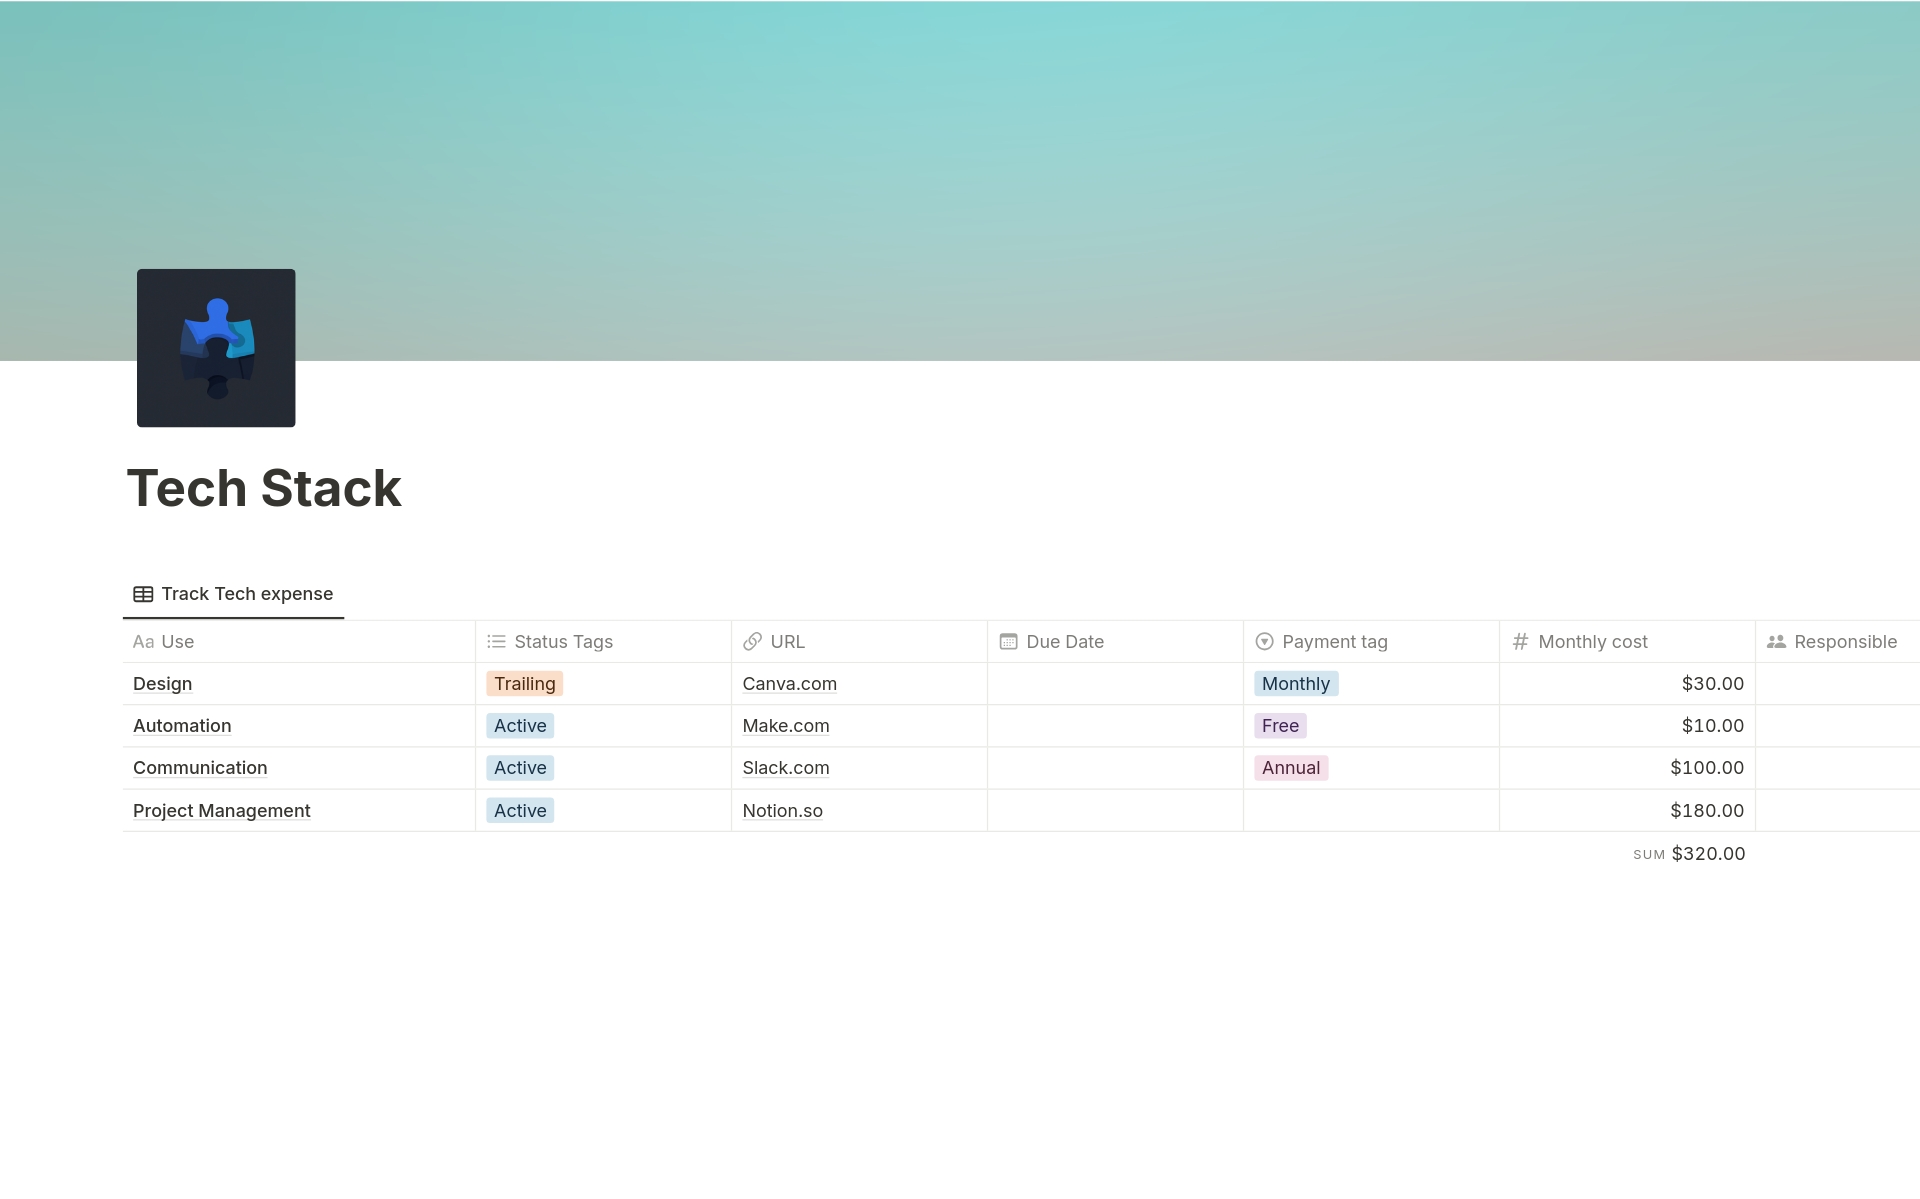 Managing a tech stack efficiently is crucial for any organization, ensuring that the right tools are in place, costs are controlled, and payments are made on time. This Tech Stack Management Template provides a comprehensive solution for tracking subscribed tools, associated cost